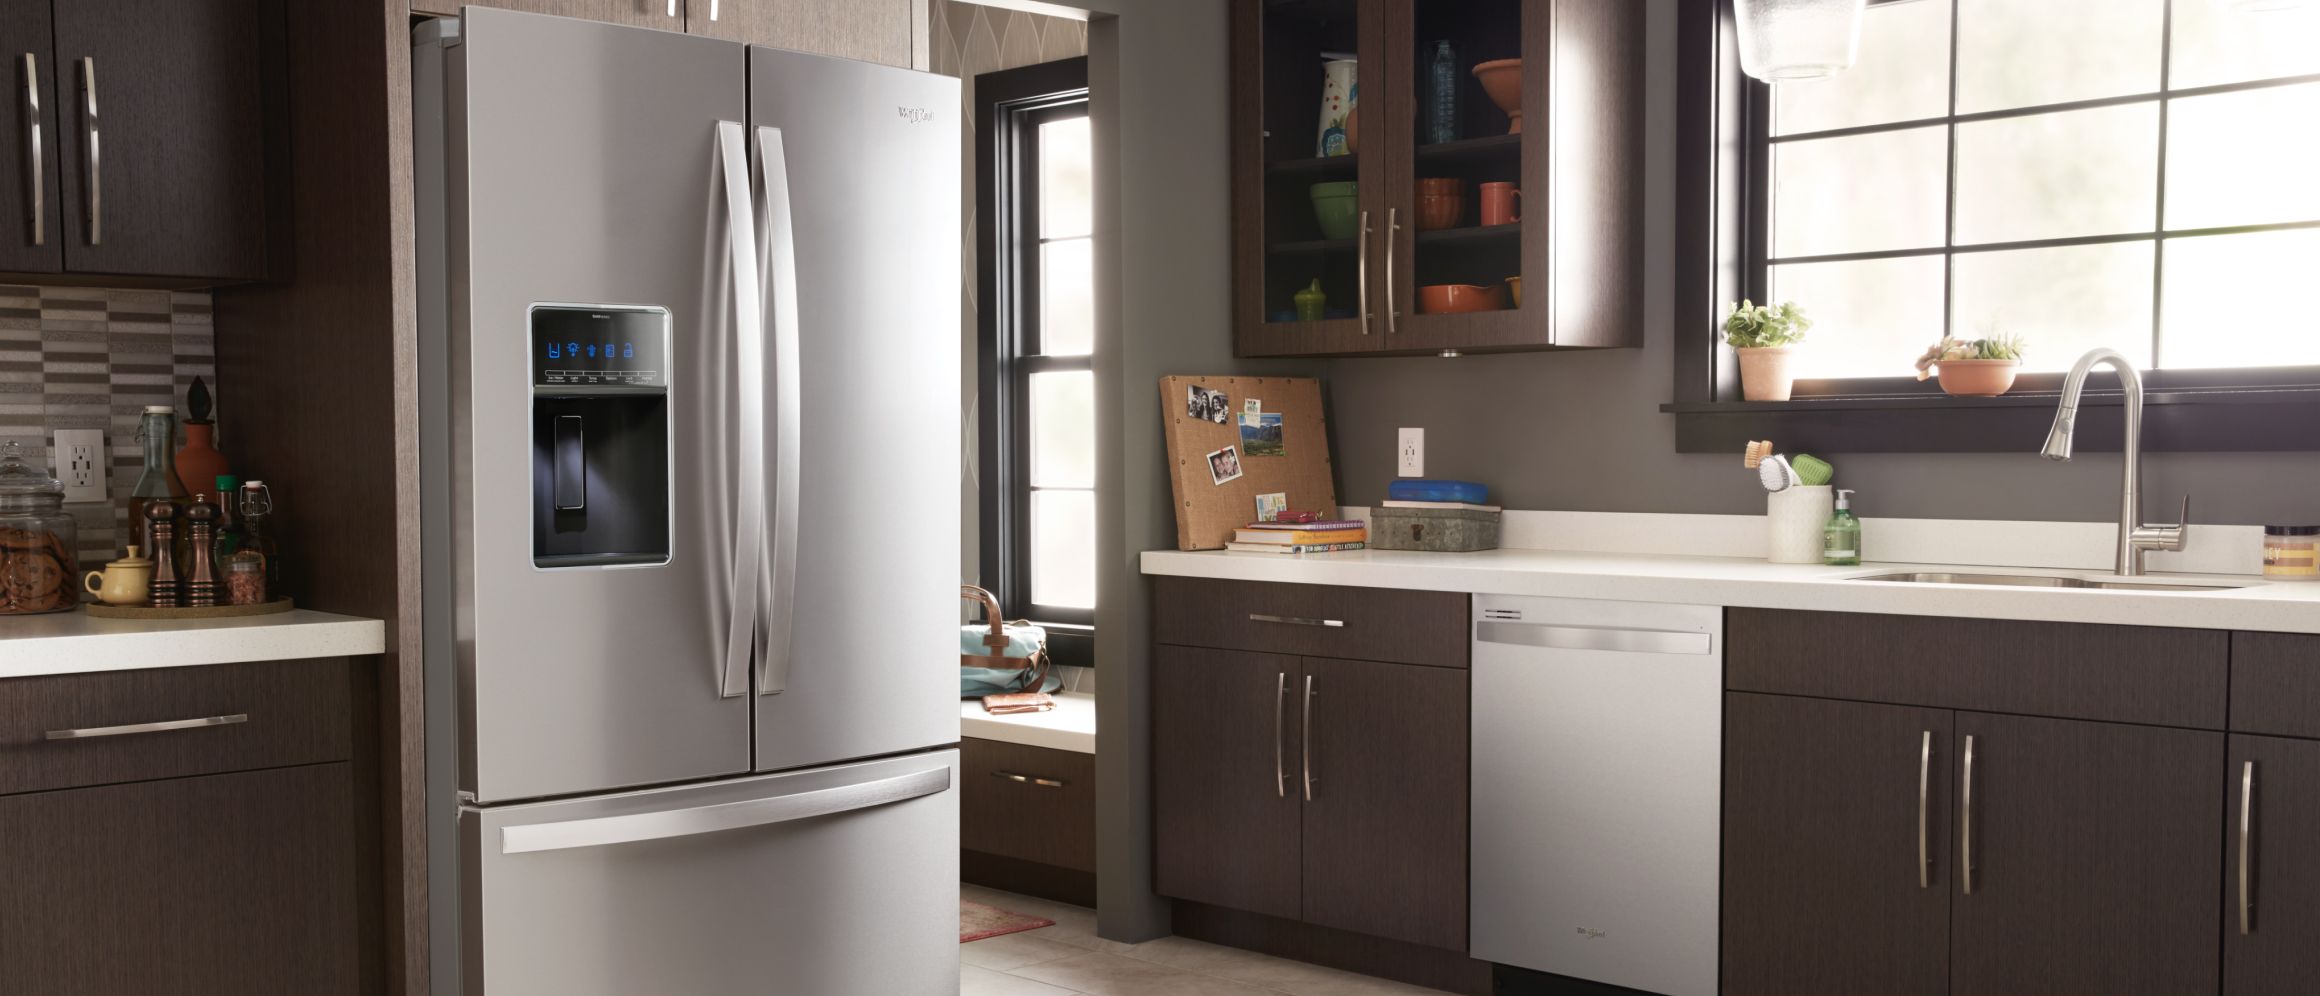 A Whirlpool® refrigerator in a kitchen